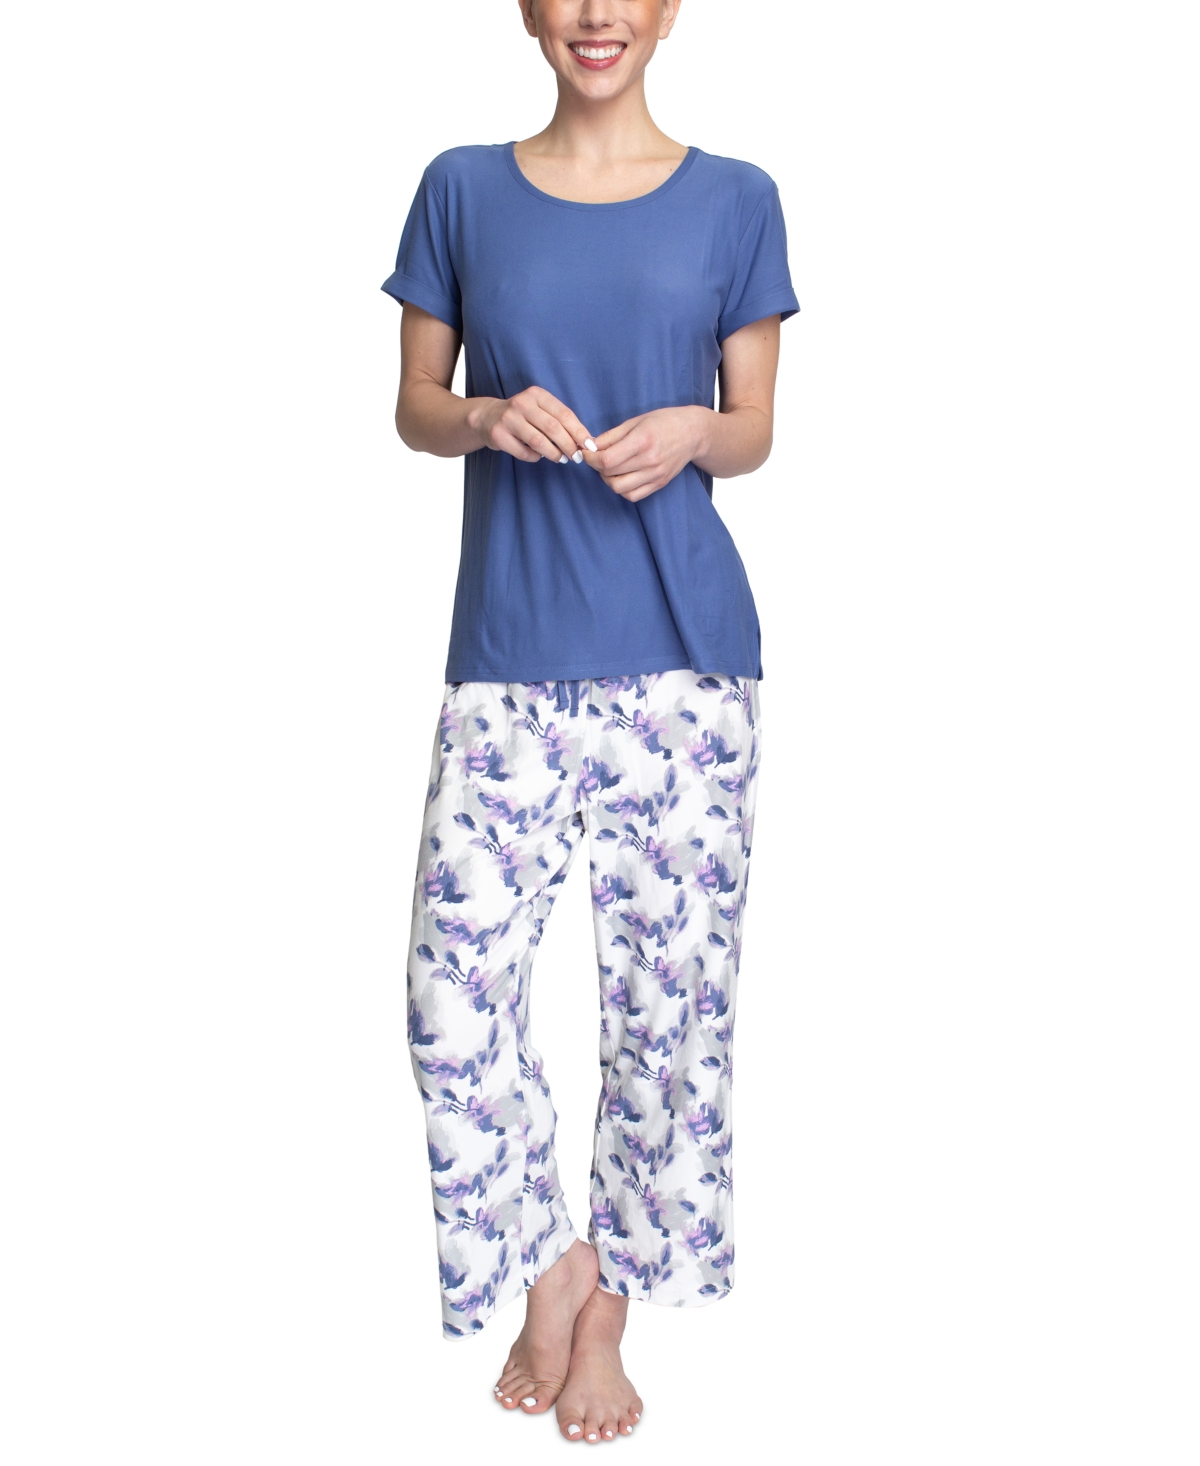 Hanes Super Soft Knit Short-sleeve Top And Open-leg Pajama Pants Set In ...